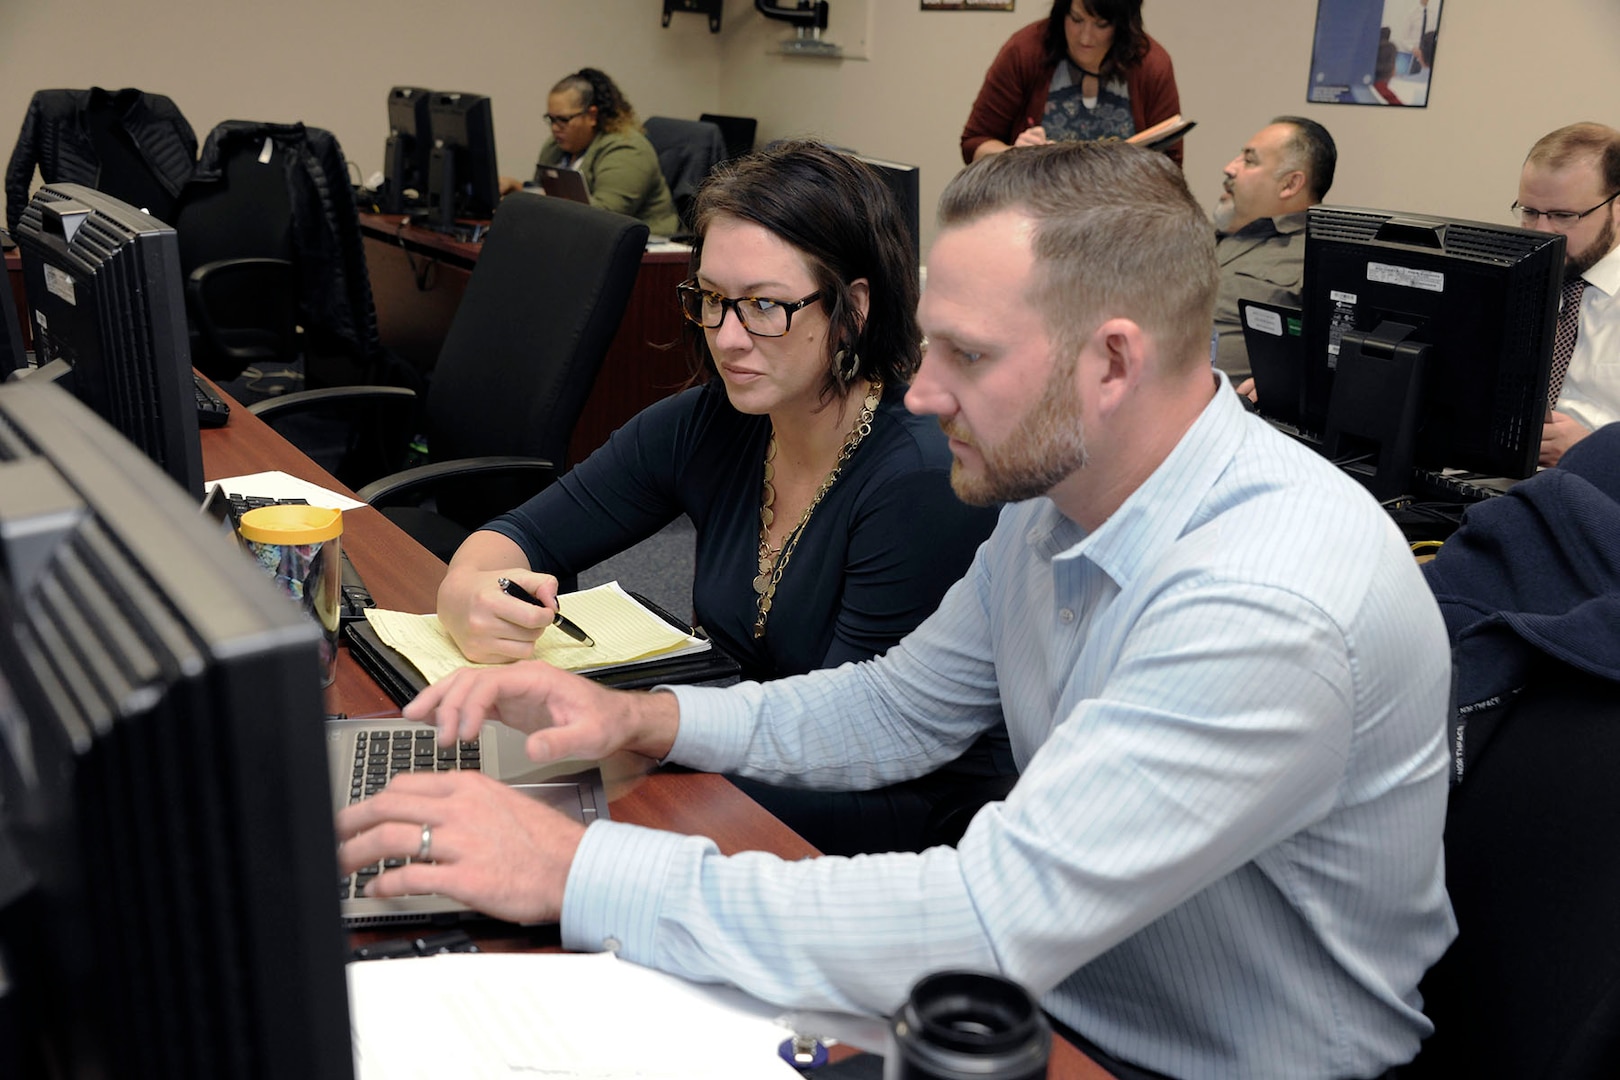 Amber Gentry-Upston, HAZMAT program manager for DLA Information Operations, works with a user during the testing.